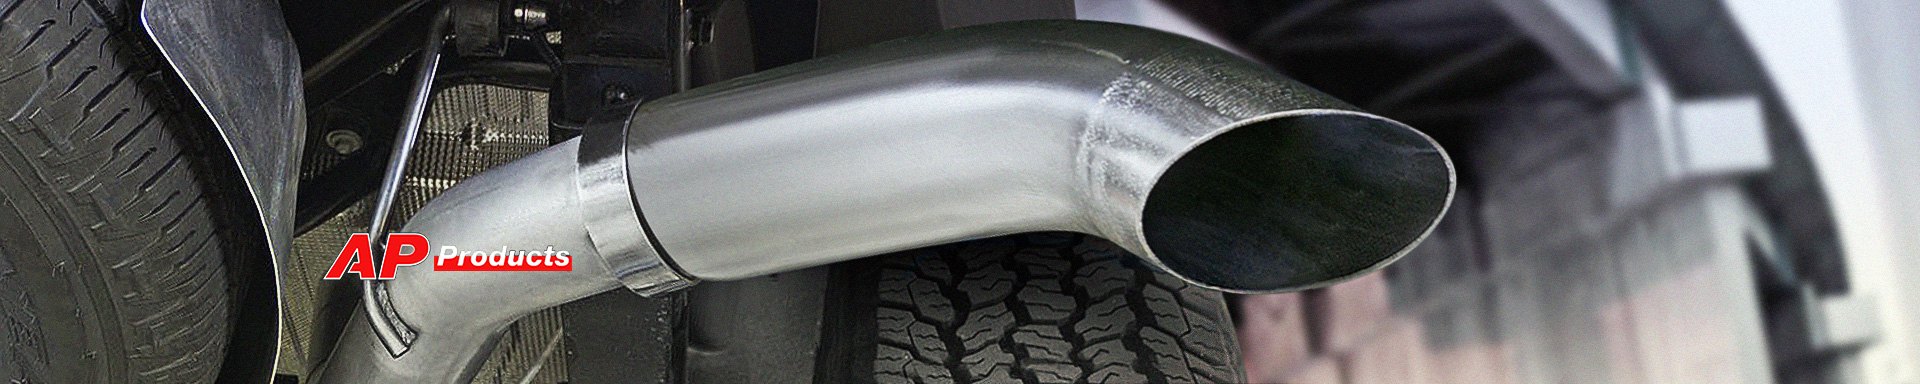 AP Products Exhaust